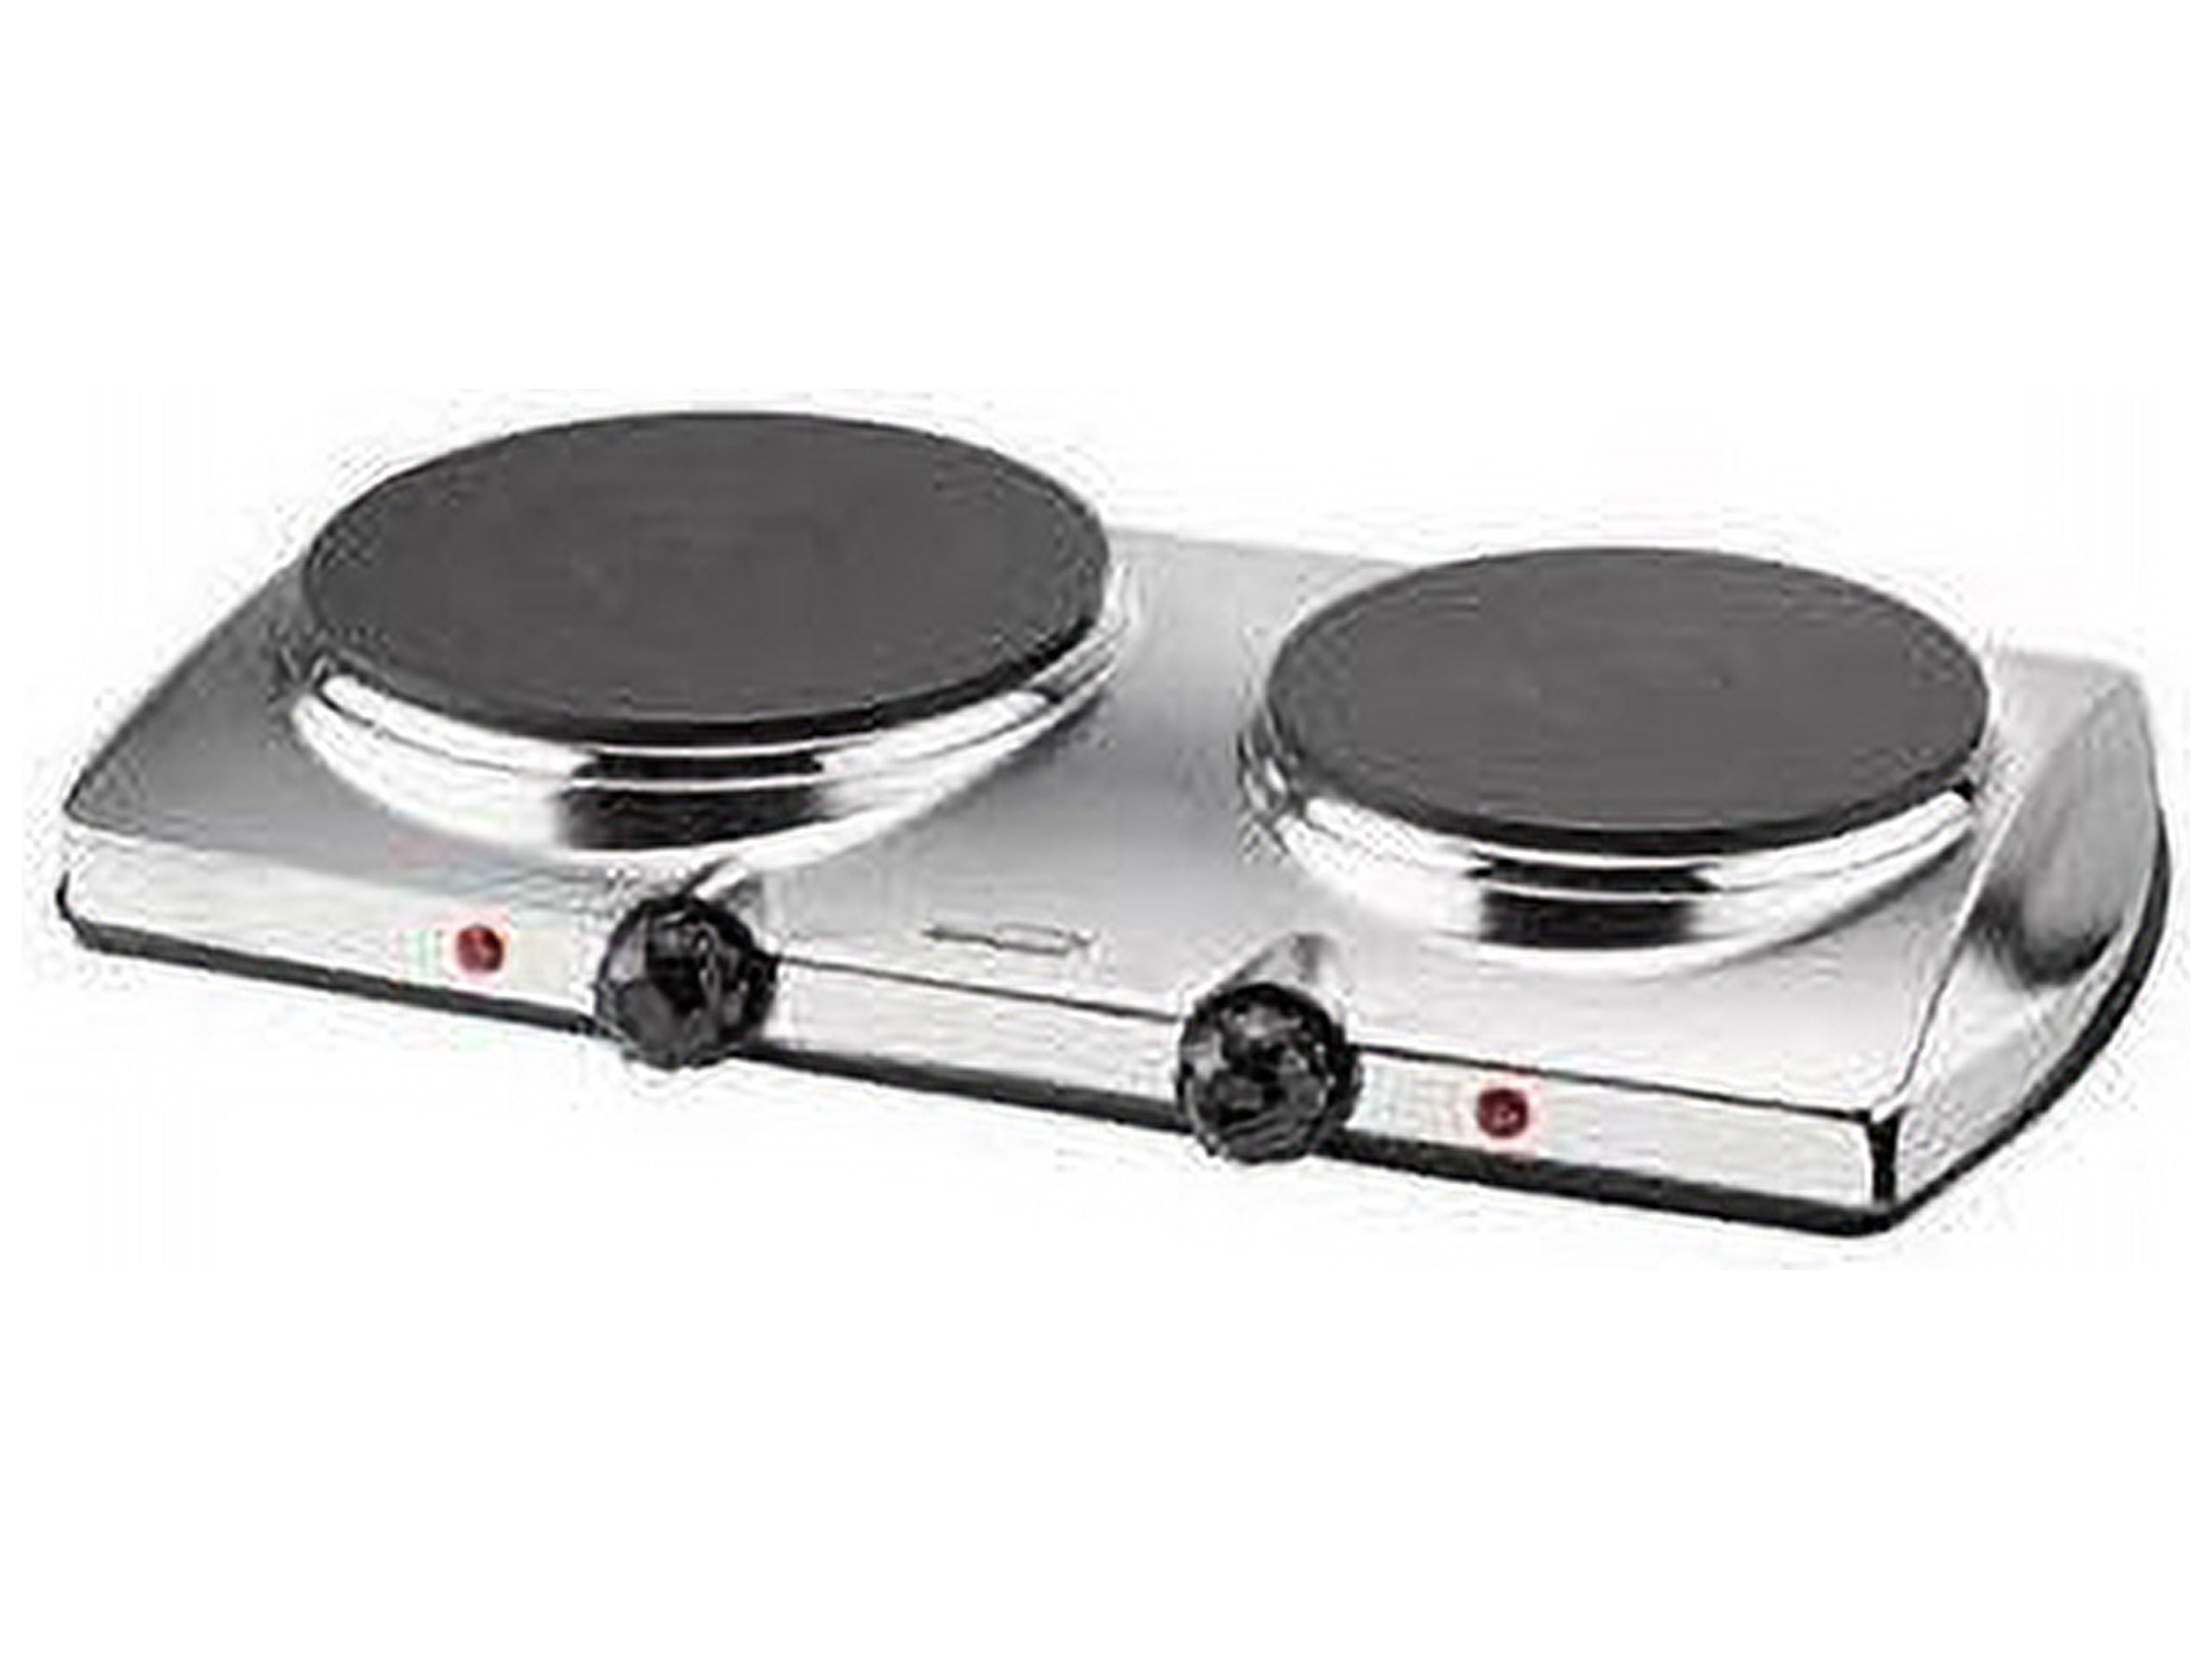 Courant 9.84-in 1 Burner Stainless Steel Electric Hot Plate | WCEB1100K697